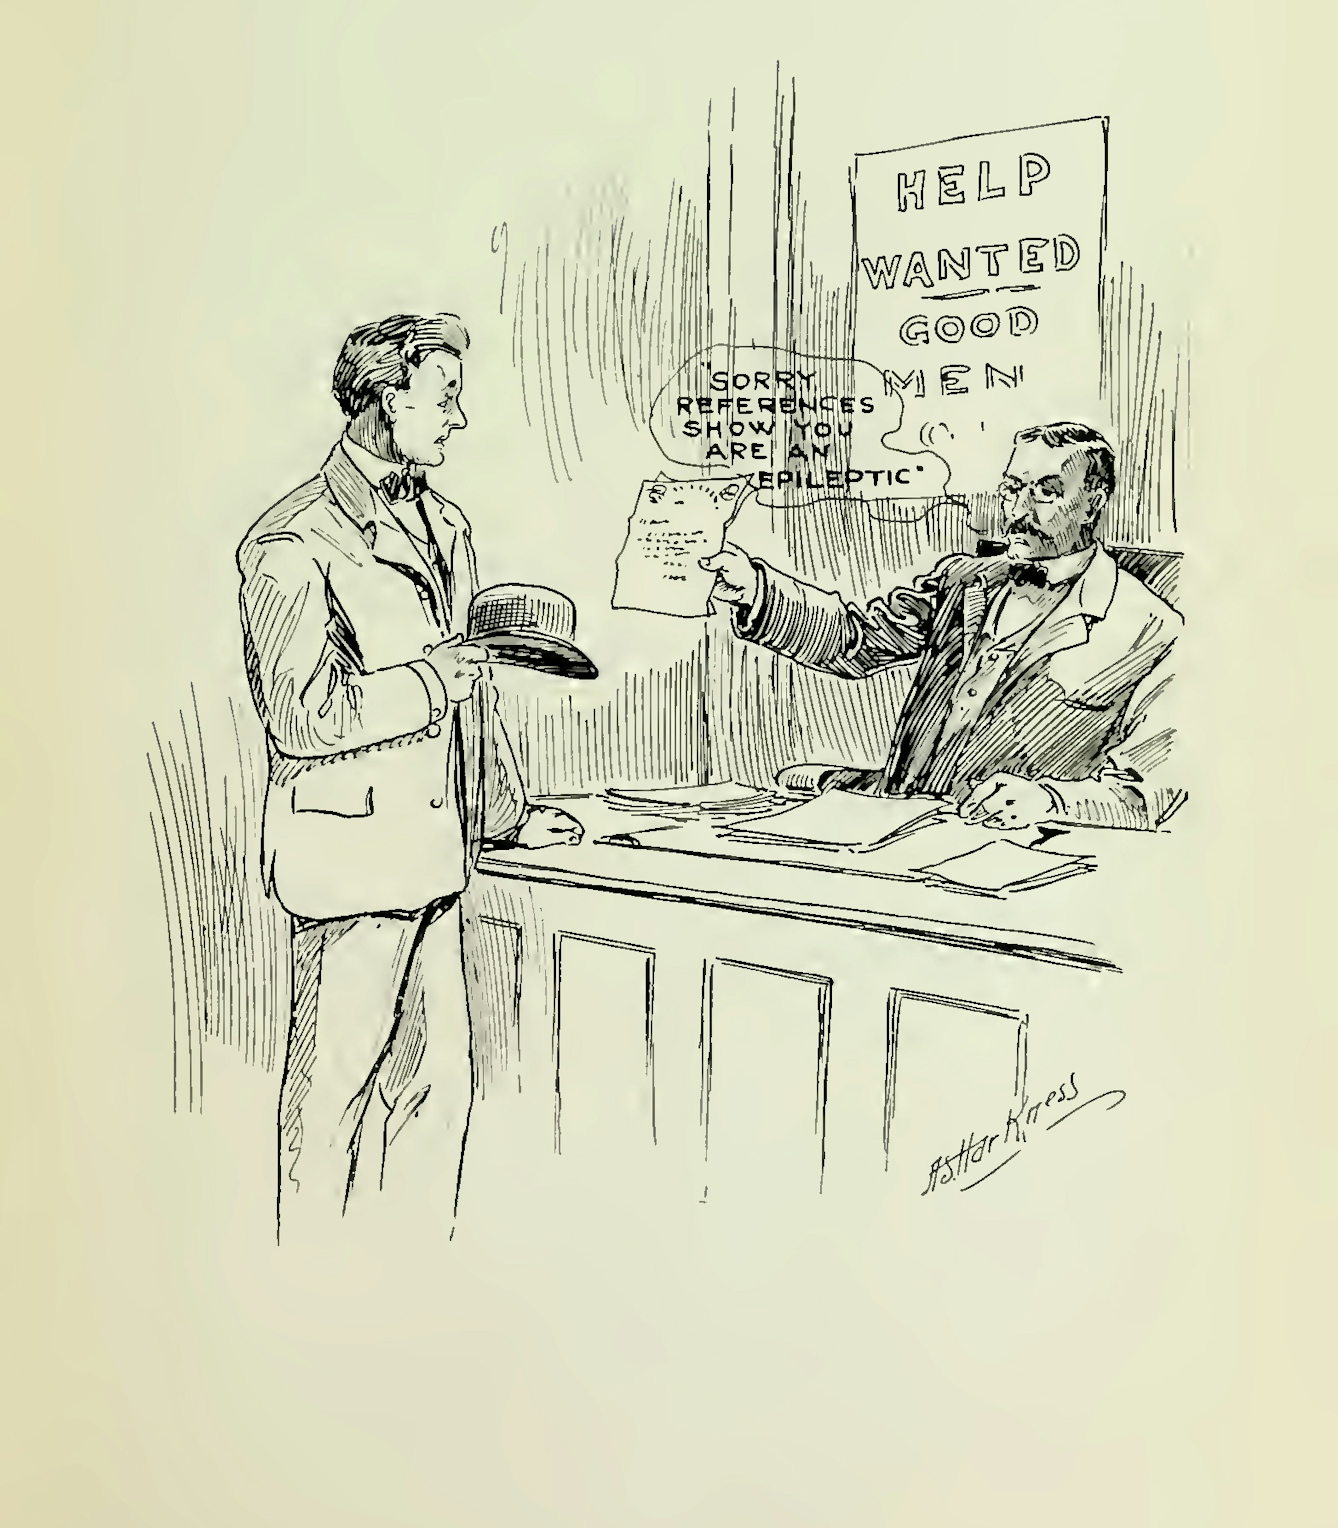 A drawing of an employer sat behind a desk showing a piece of pater to another man standing in front of the desk, hat in hand, a piece of paper.